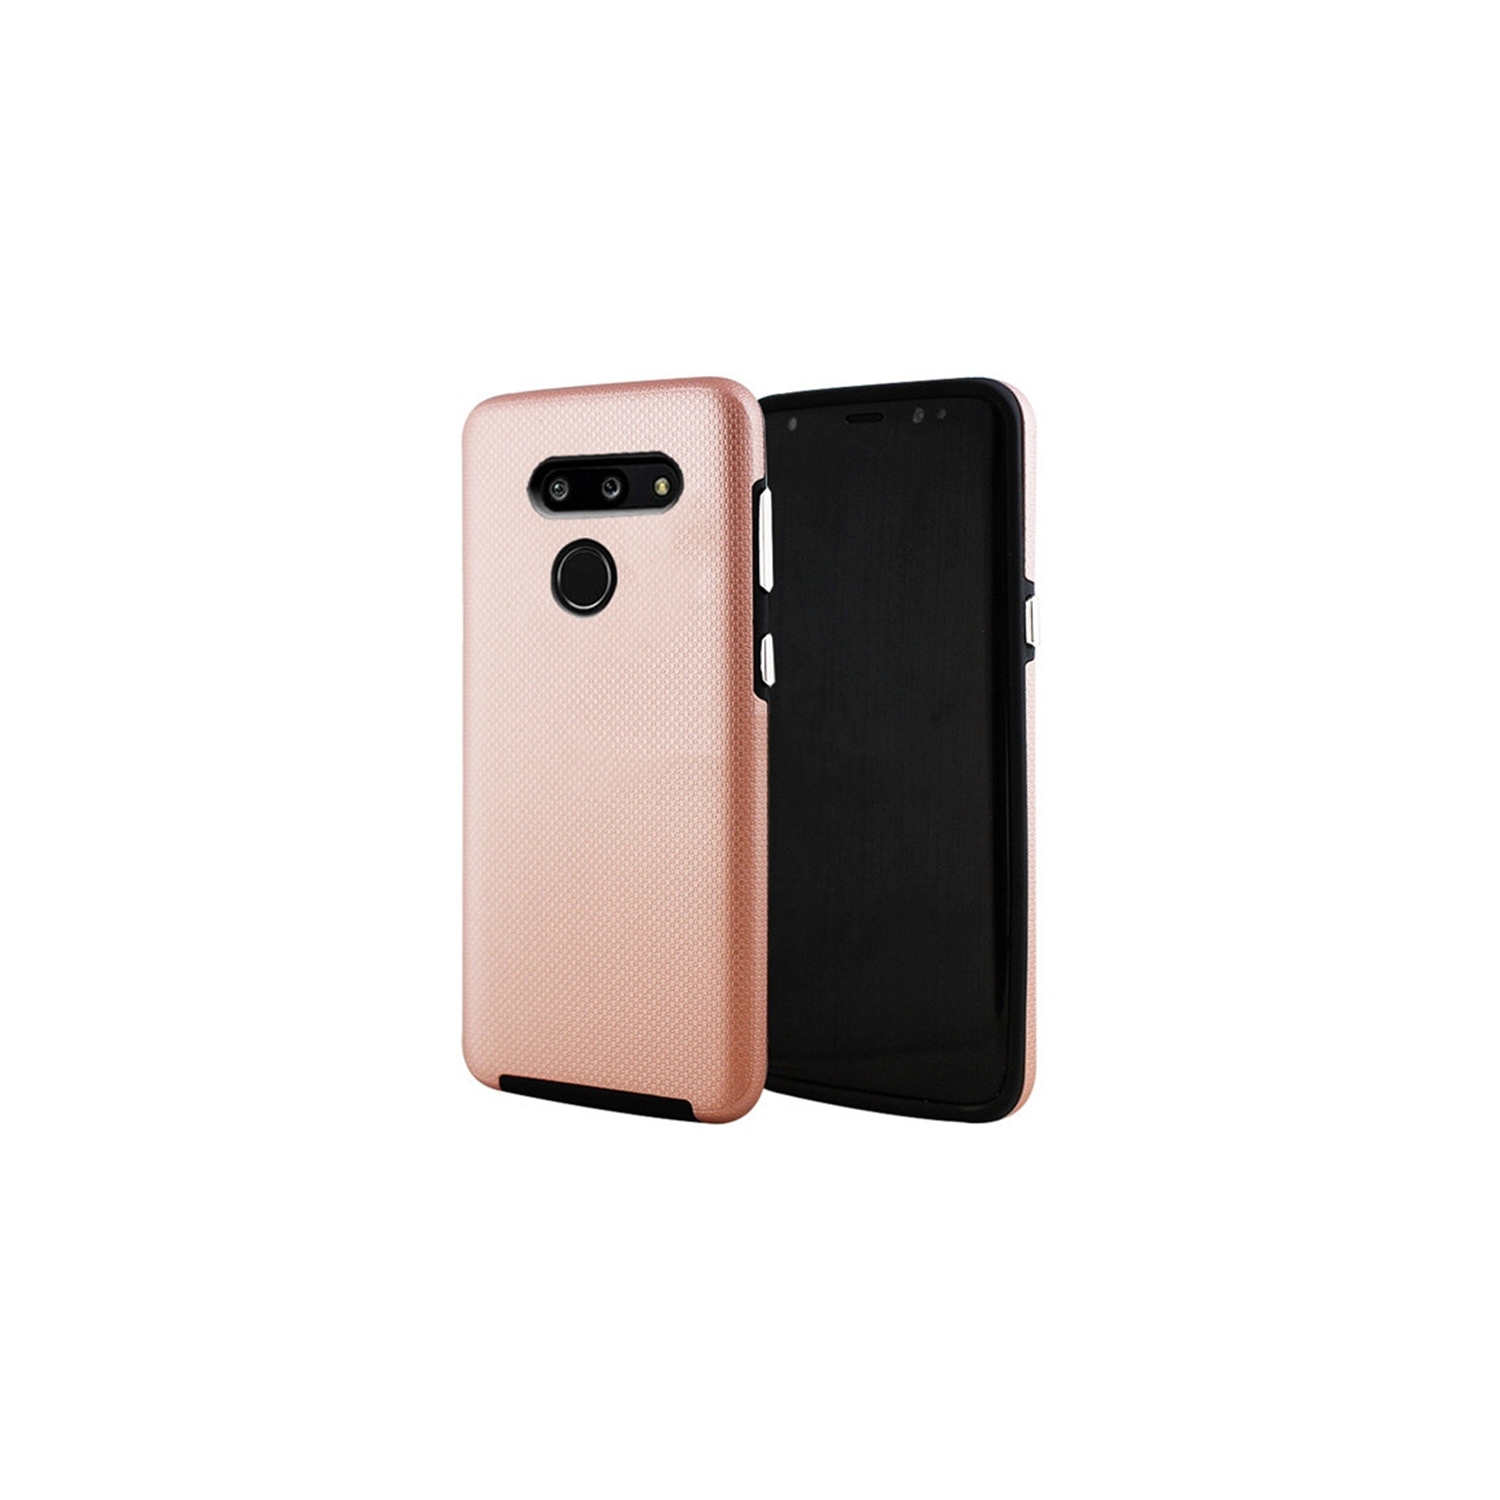 【CSmart】 Slim Fitted Hybrid Hard PC Shell Shockproof Scratch Resistant Case Cover for LG G8, Rose Gold